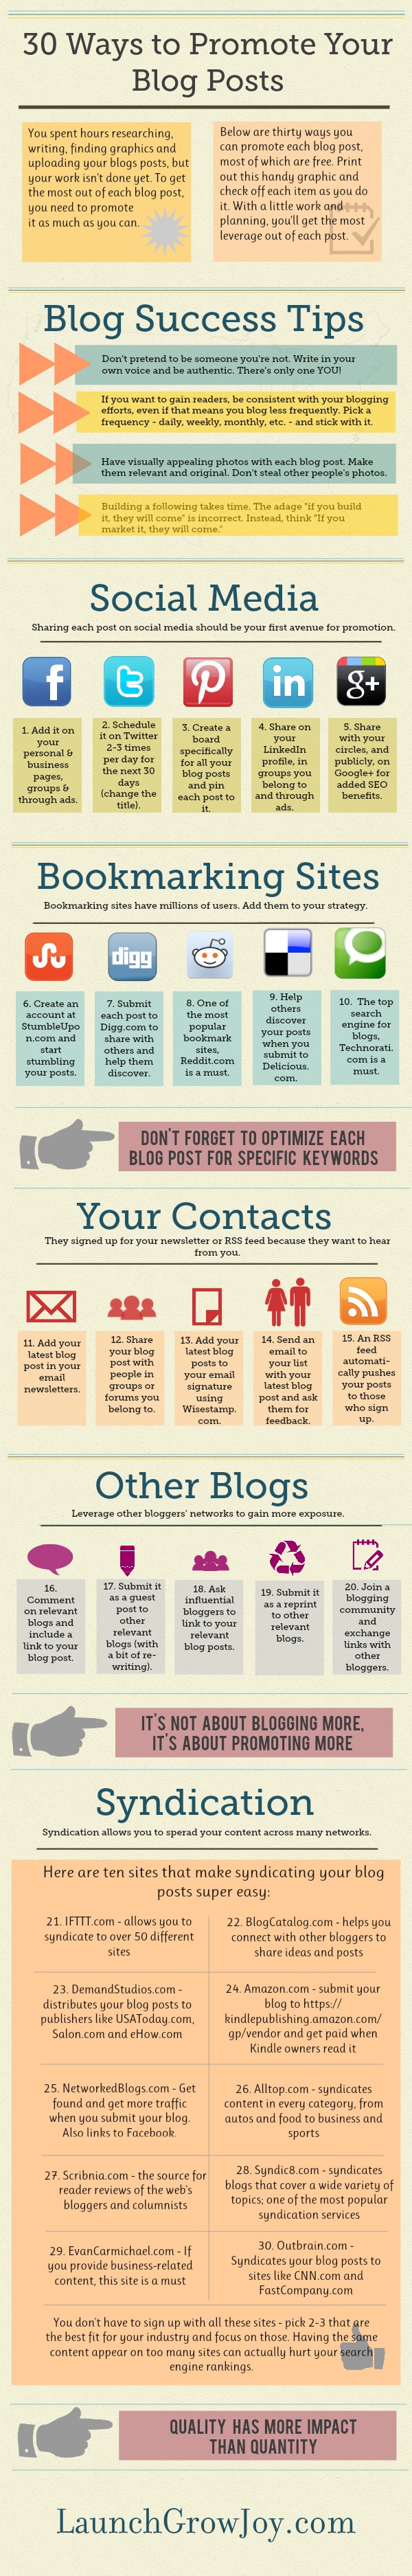 ways-promote-your-blog-infographic